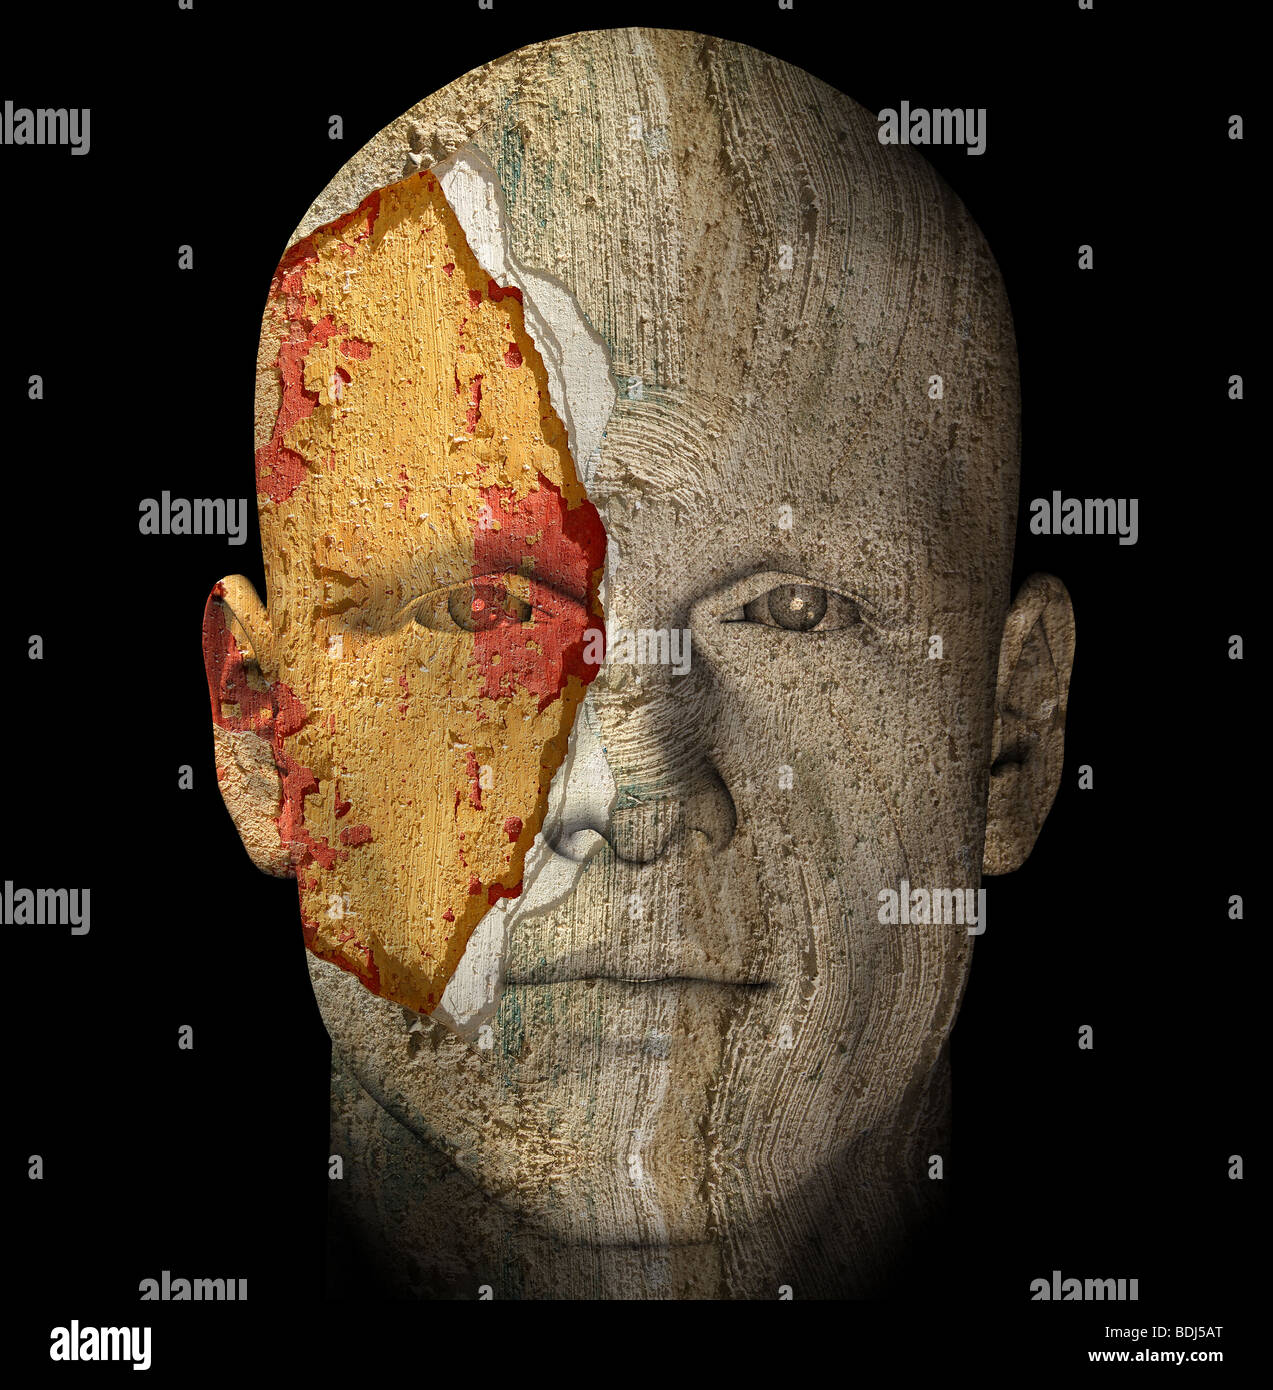 Broken and weathered statue head. 3-d digitally created illustration. Stock Photo